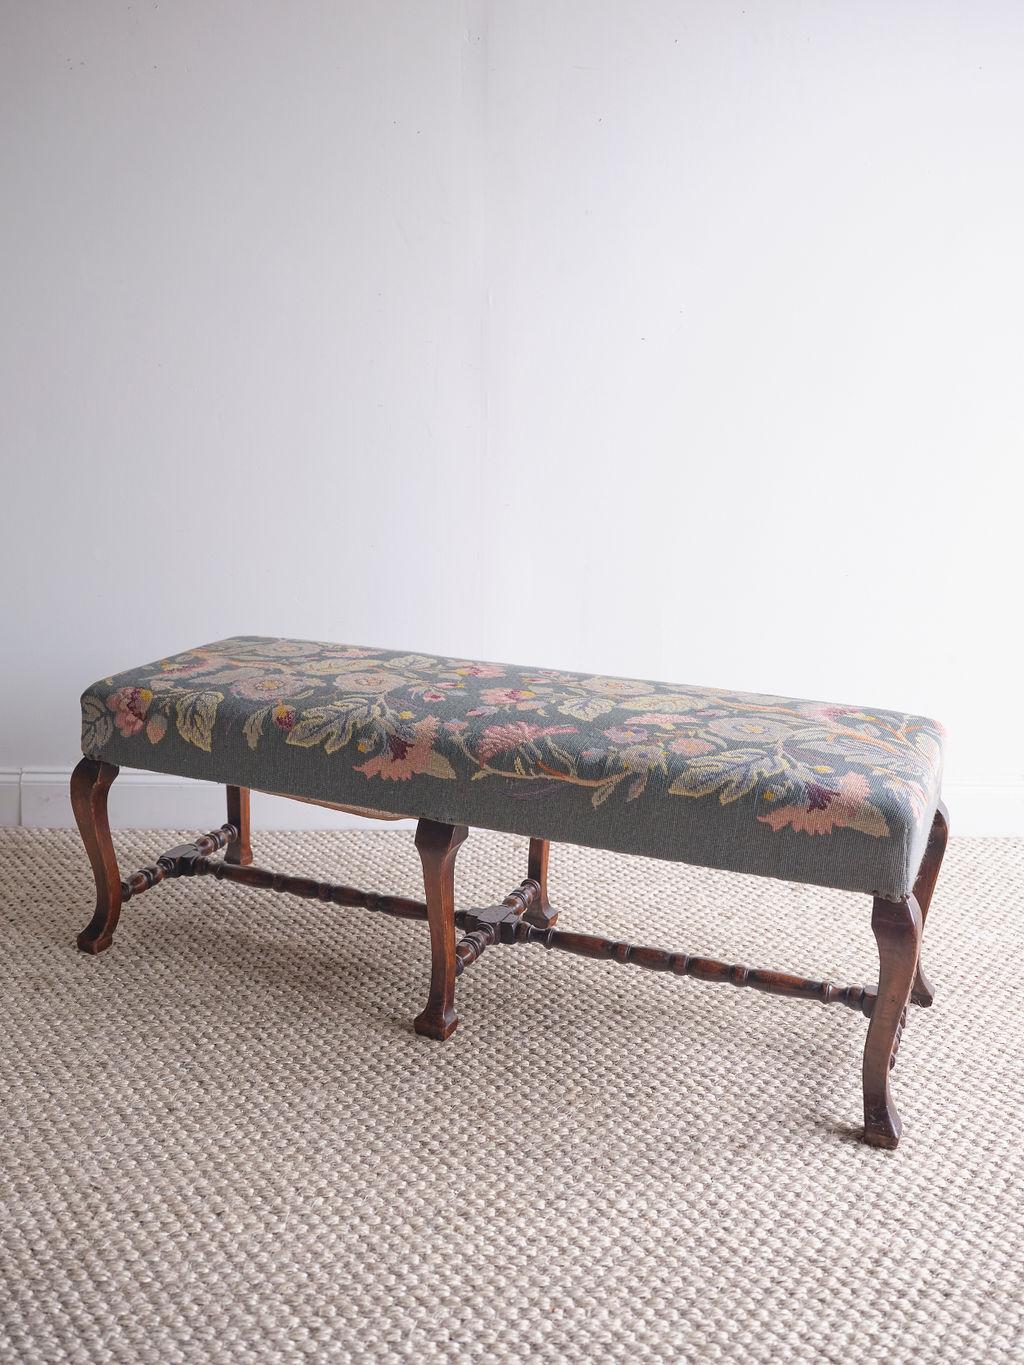 This lovely hand stitched needlepoint stool features elegant light pink, dark pink, and yellow flowers with a light blue background. The ottoman rests on 6 ornate dark stained oak legs with a base connecting the legs. Because the seat of this piece